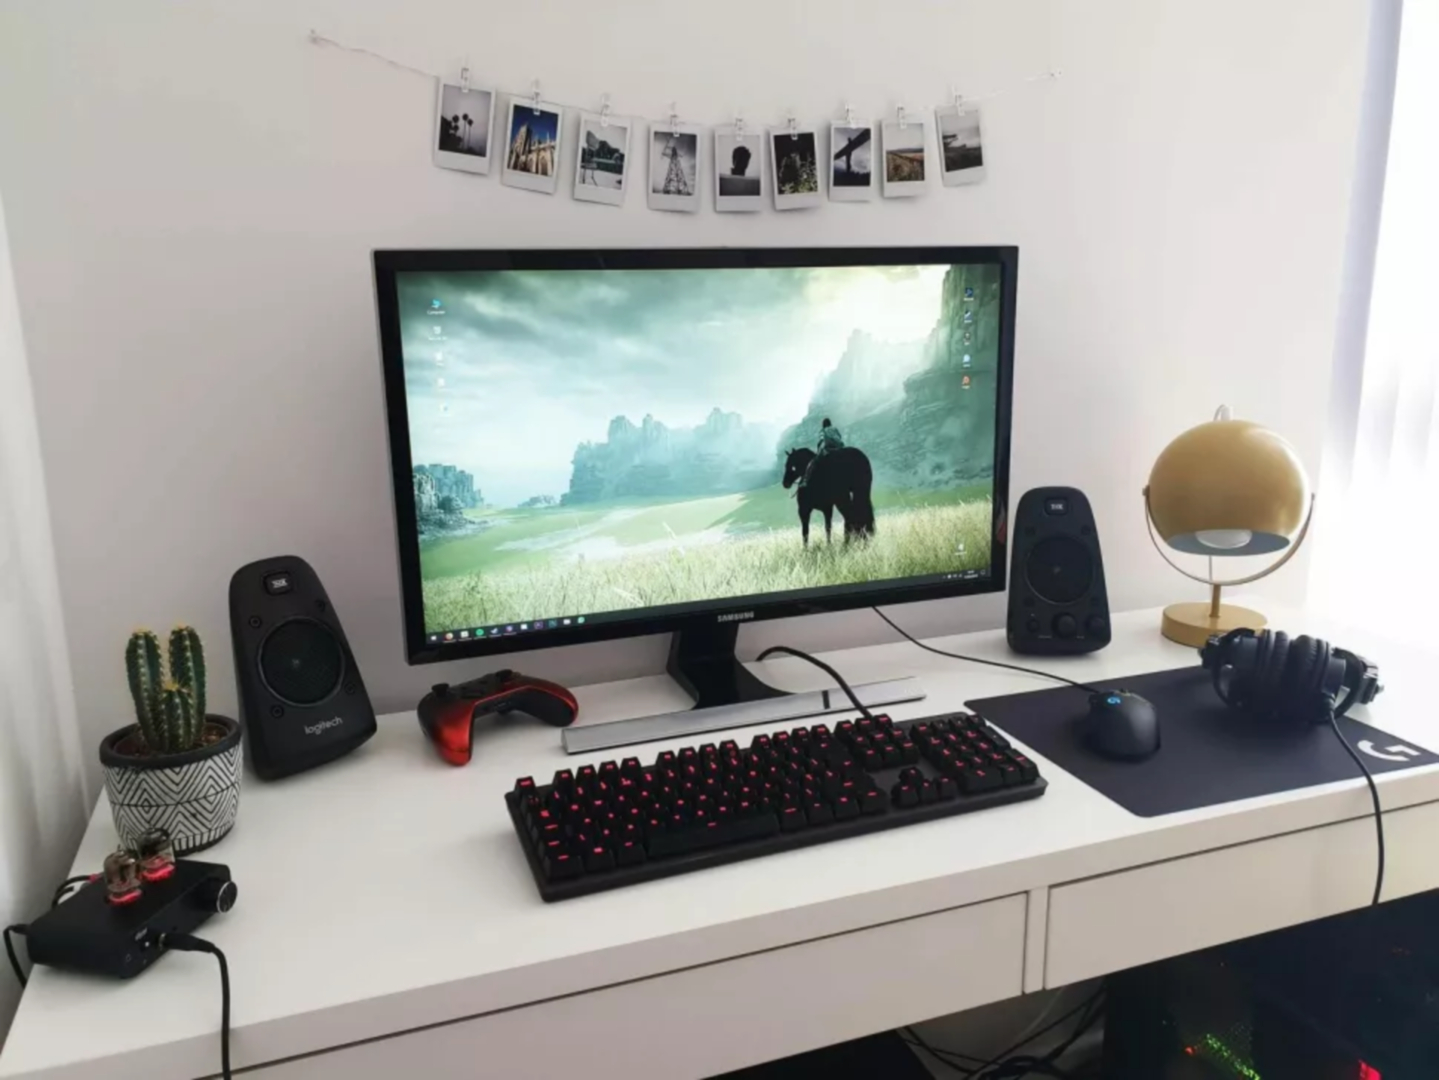 What Have You Used To Make Your Desk A Nicer Place? thumbnail